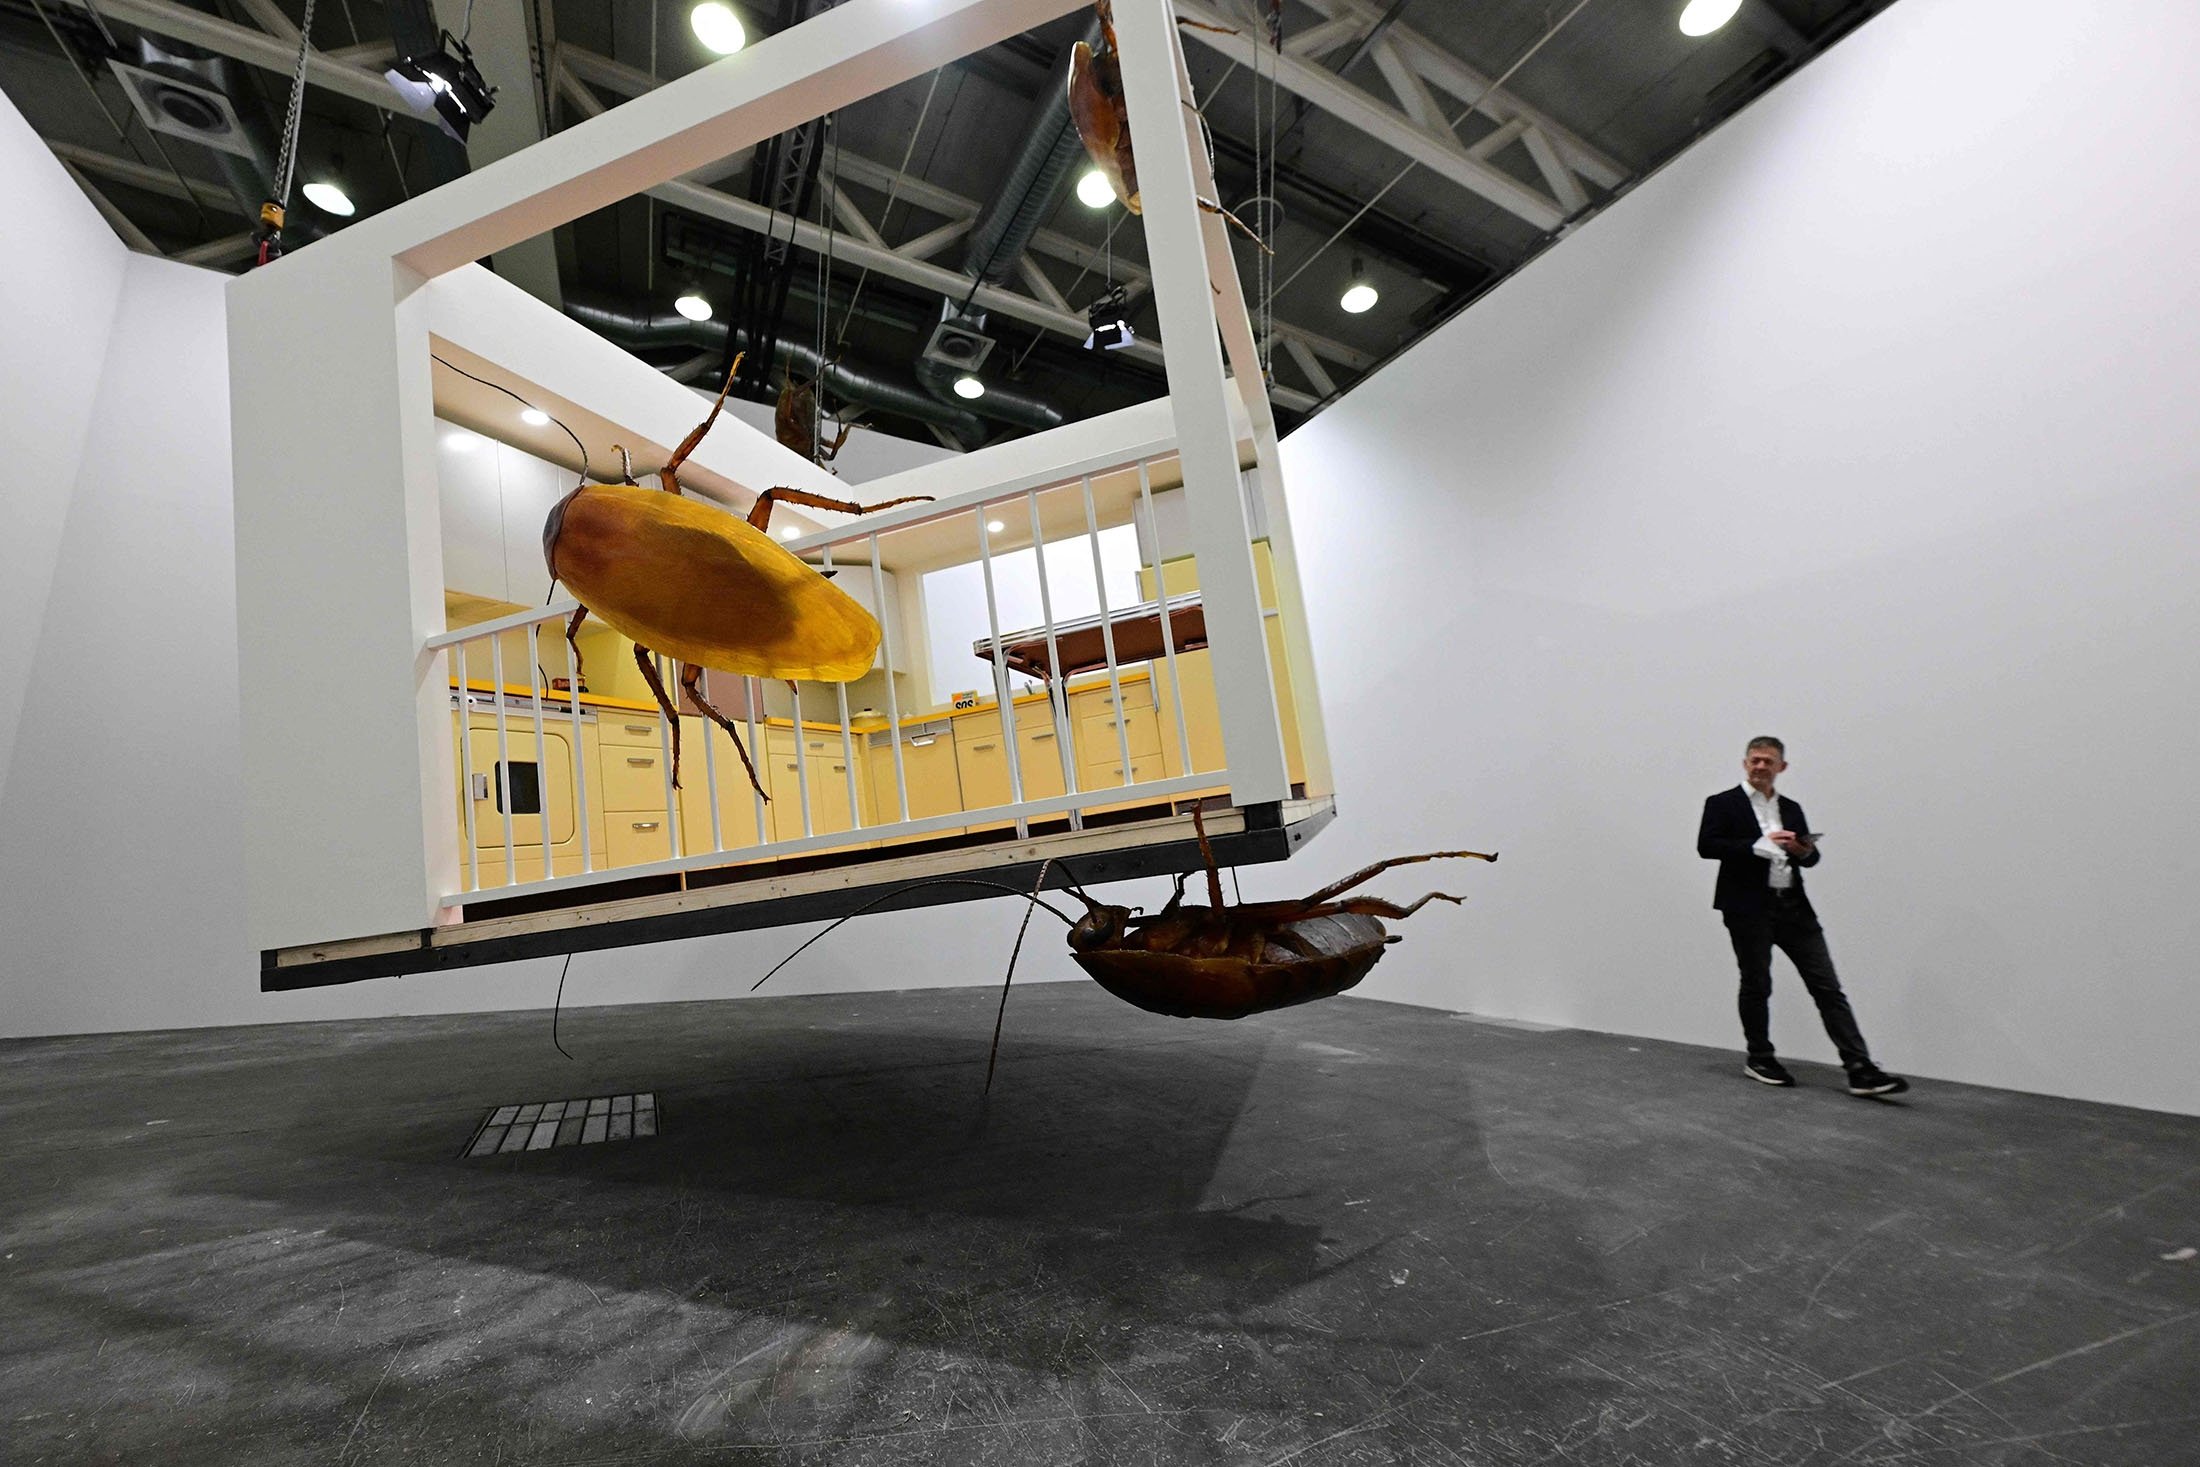 A man looks at Huang Yong Ping's artwork "American kitchen and Chinese" during a preview day of Art Basel, the world's premier modern and contemporary art fair in Basel, Switzerland, June 14, 2022. (AFP Photo)